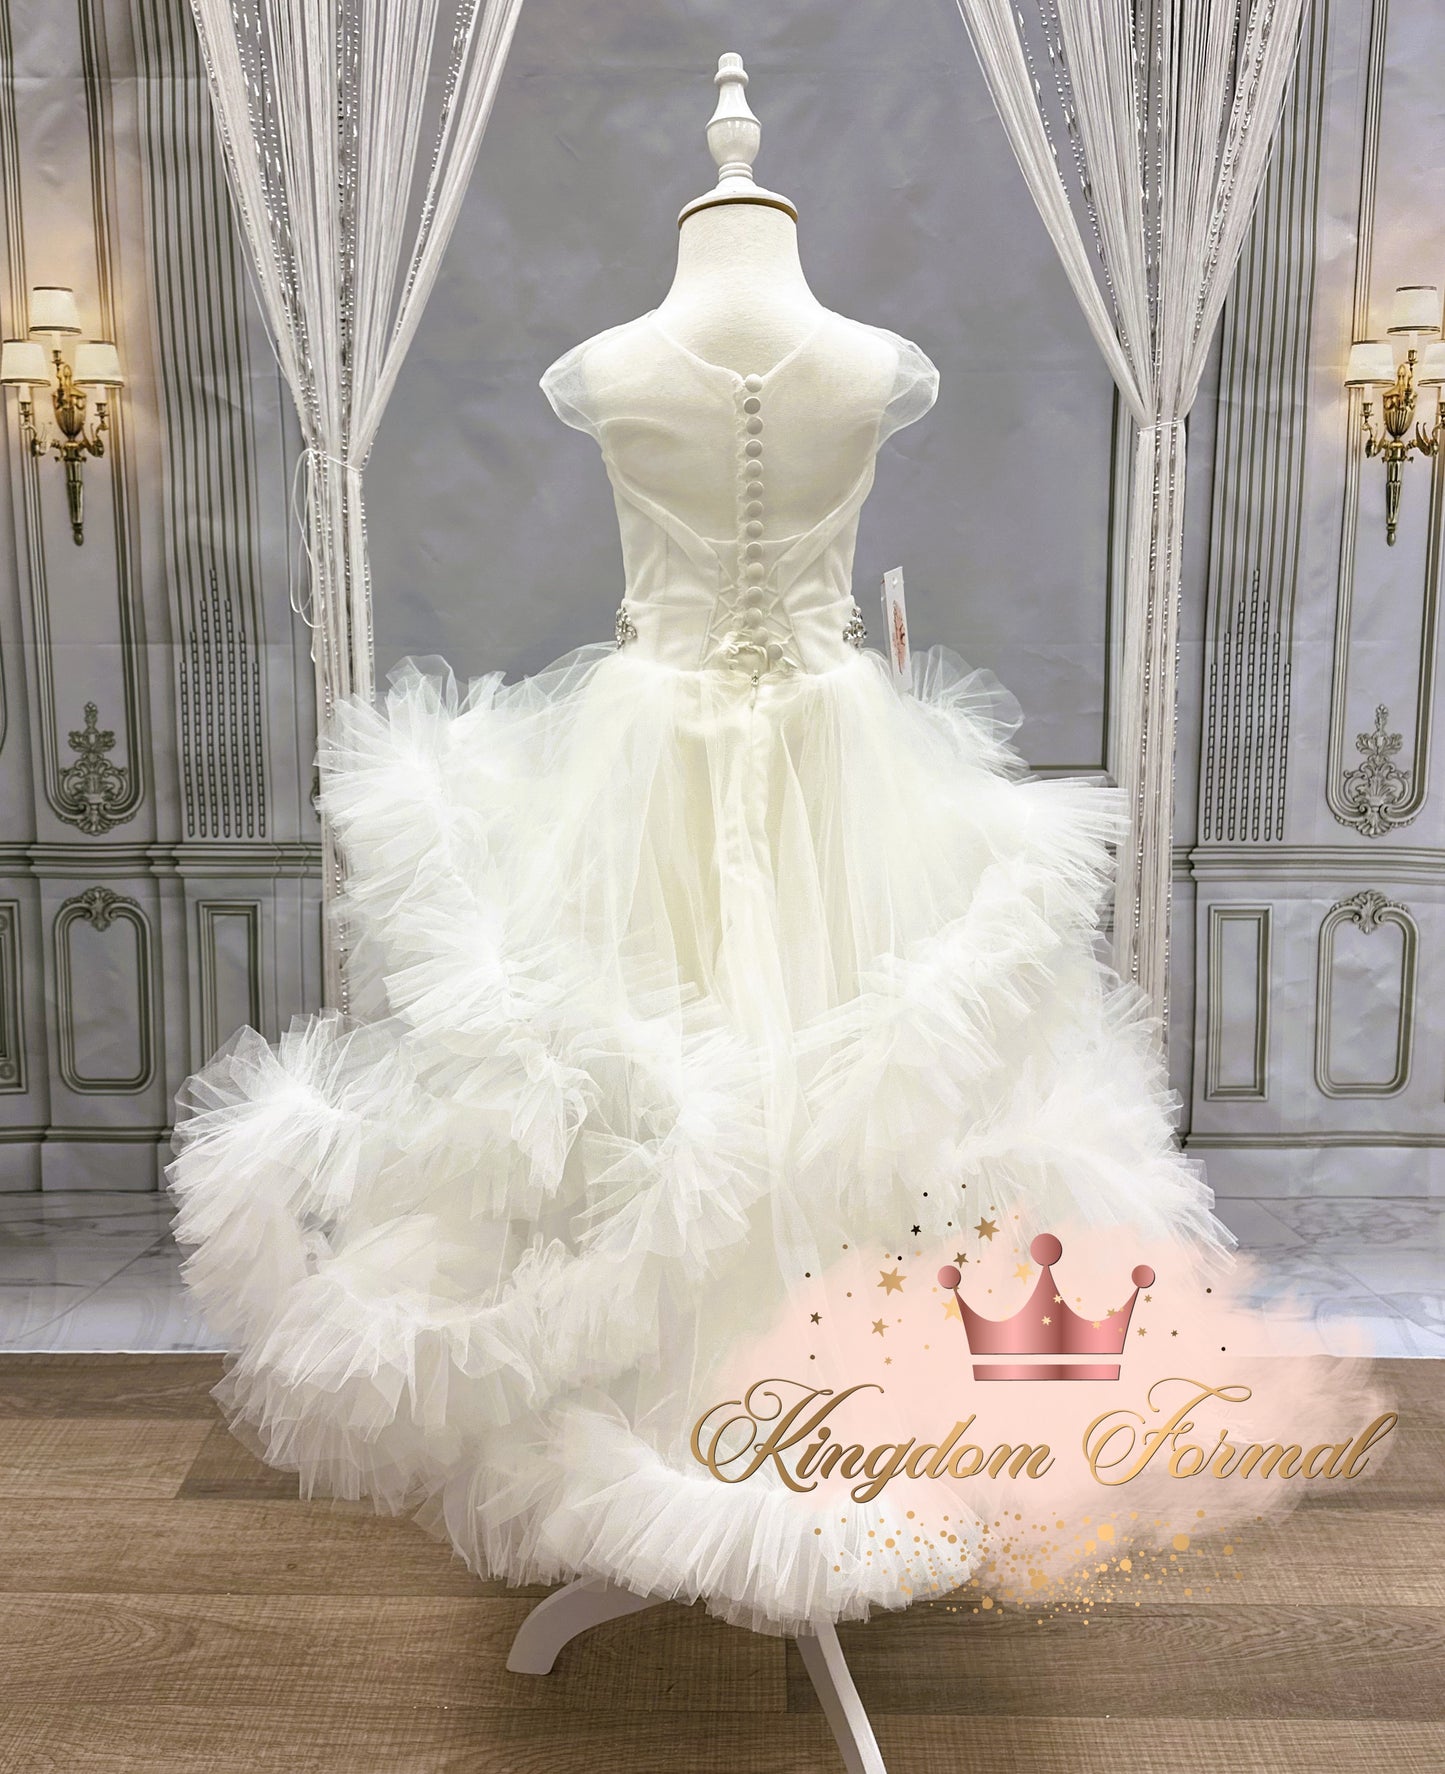 The Tovianna Gown